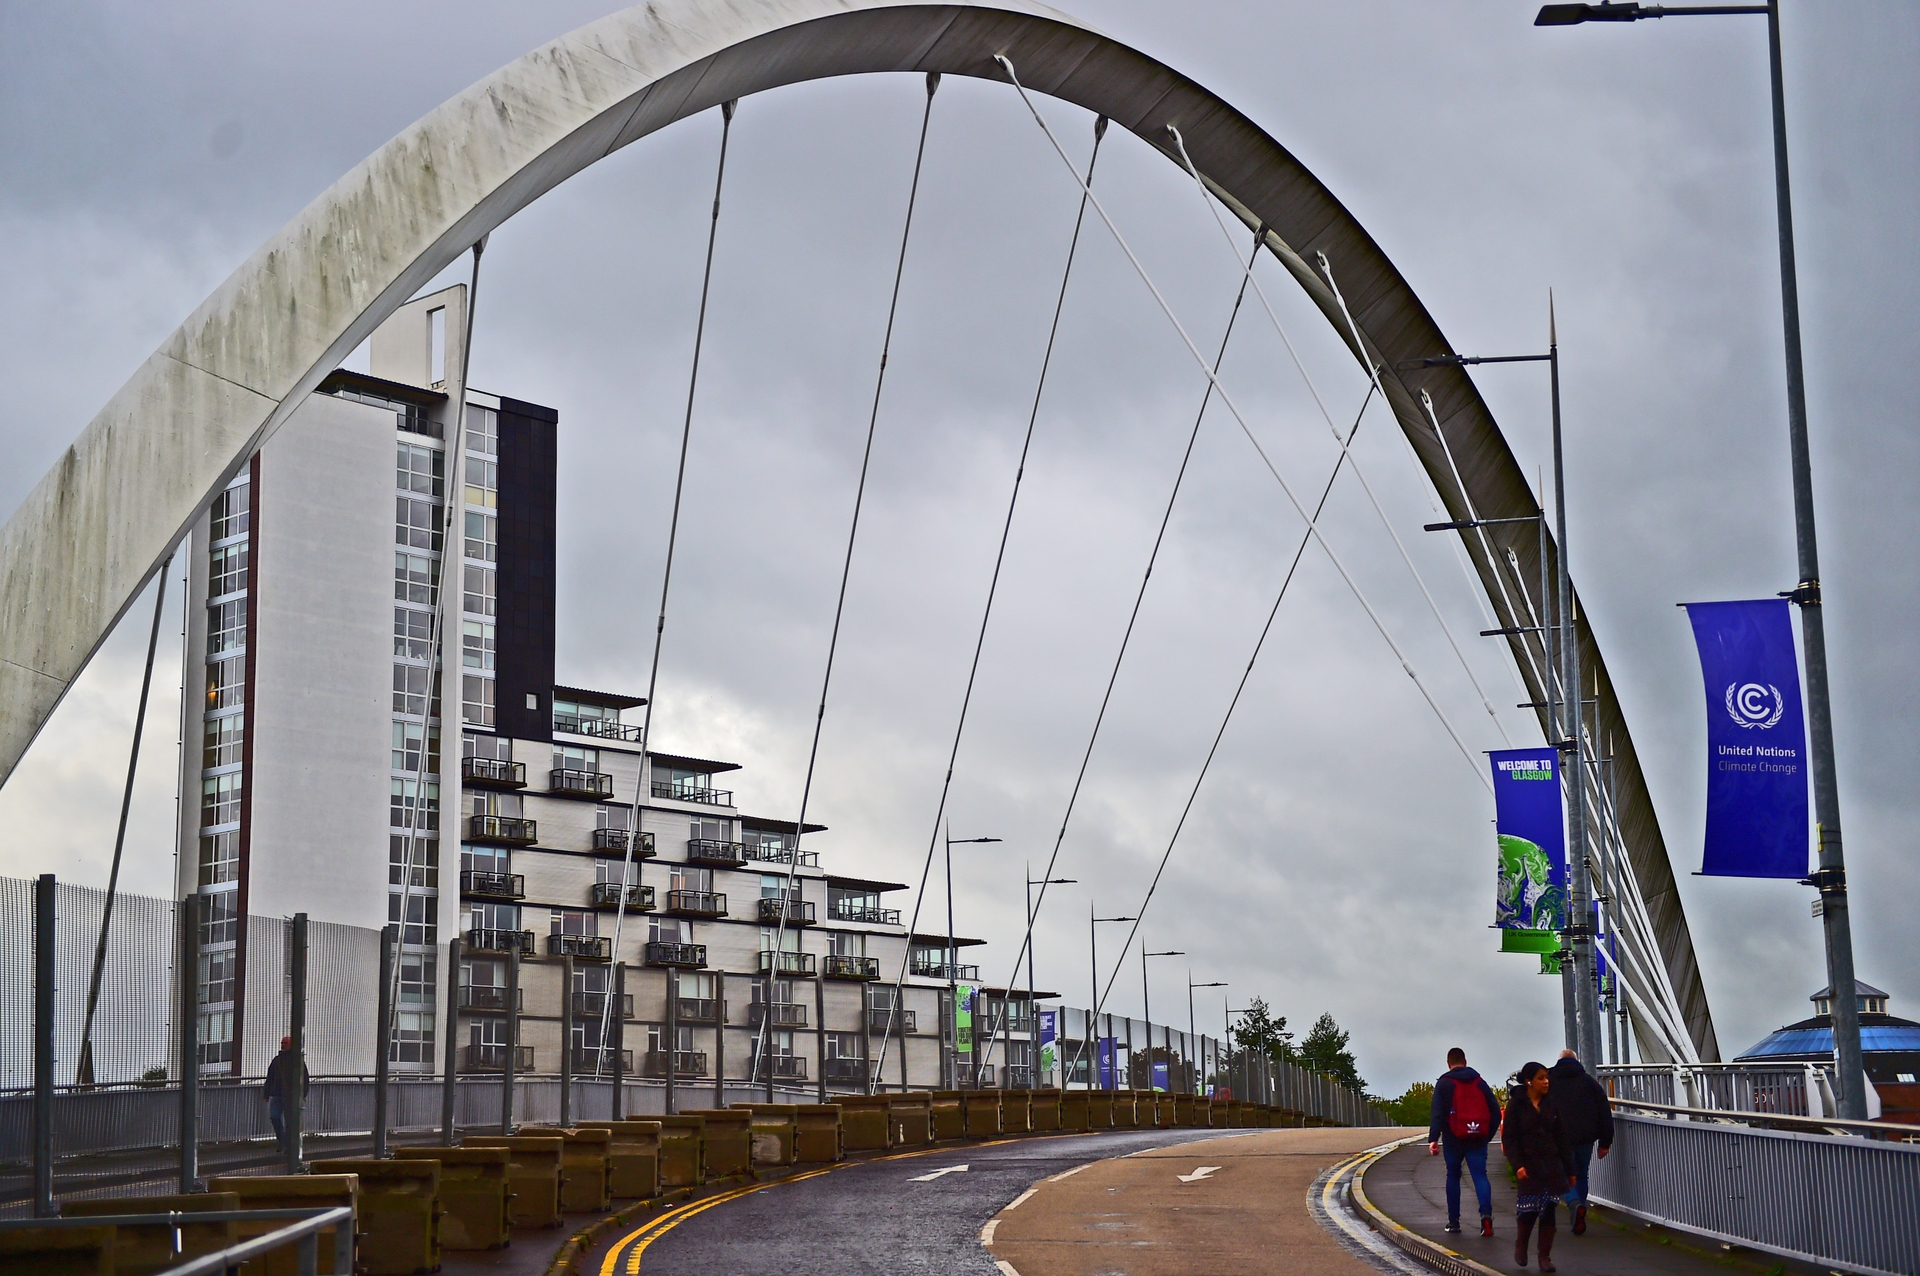 No vehicles are allowed on the usually busy Clyde Arc - or the Squinty Bridge as it's known.